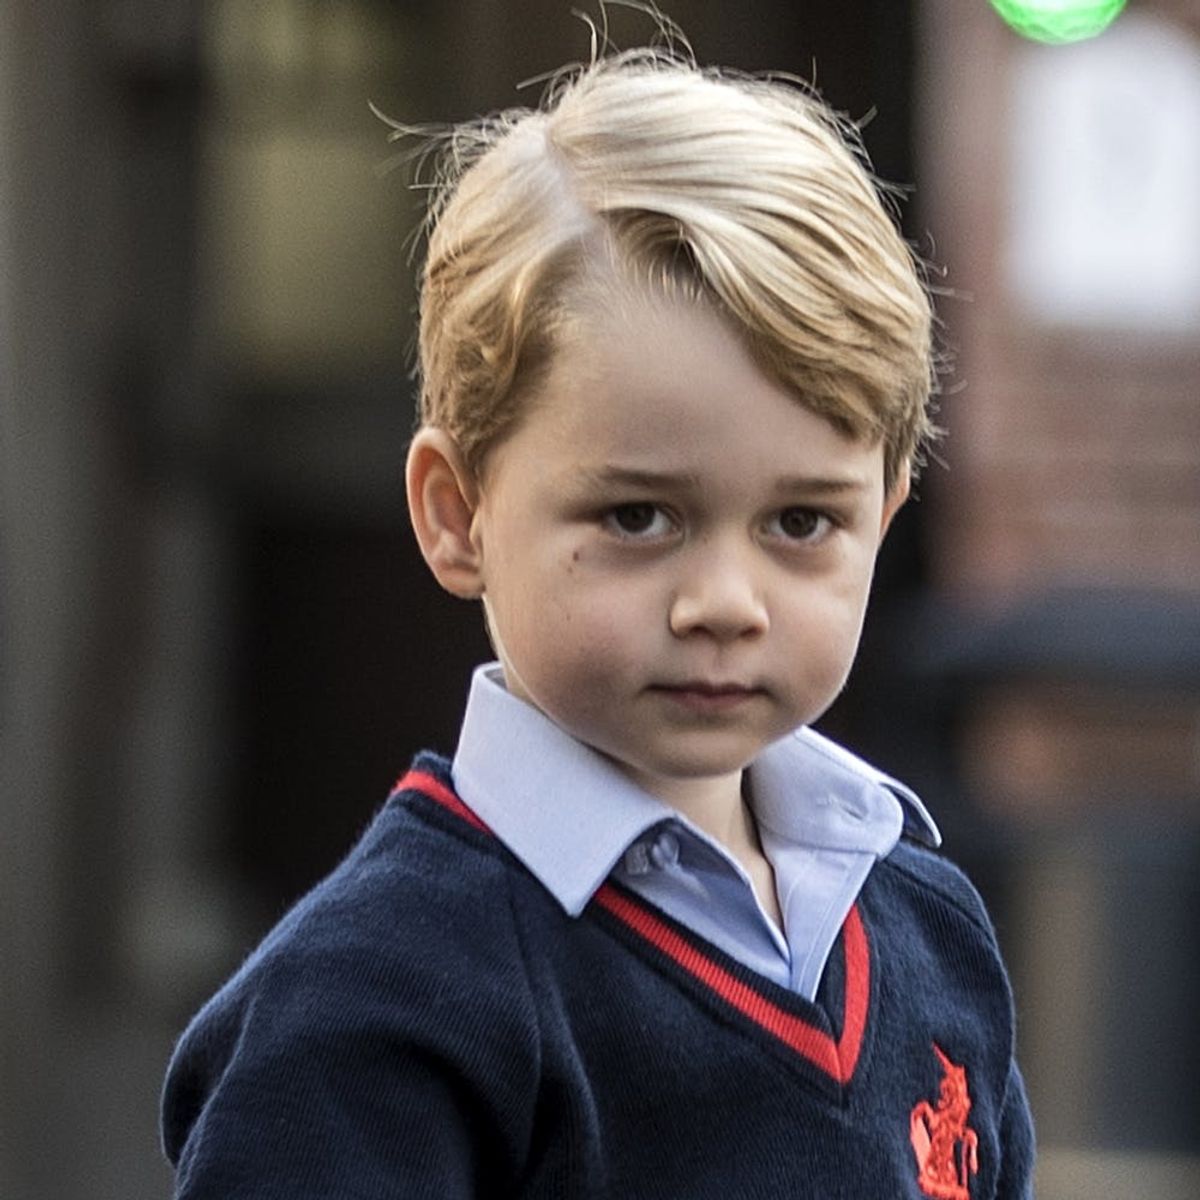 Prince George’s Handwritten Letter to Santa Has Just One Gift Request